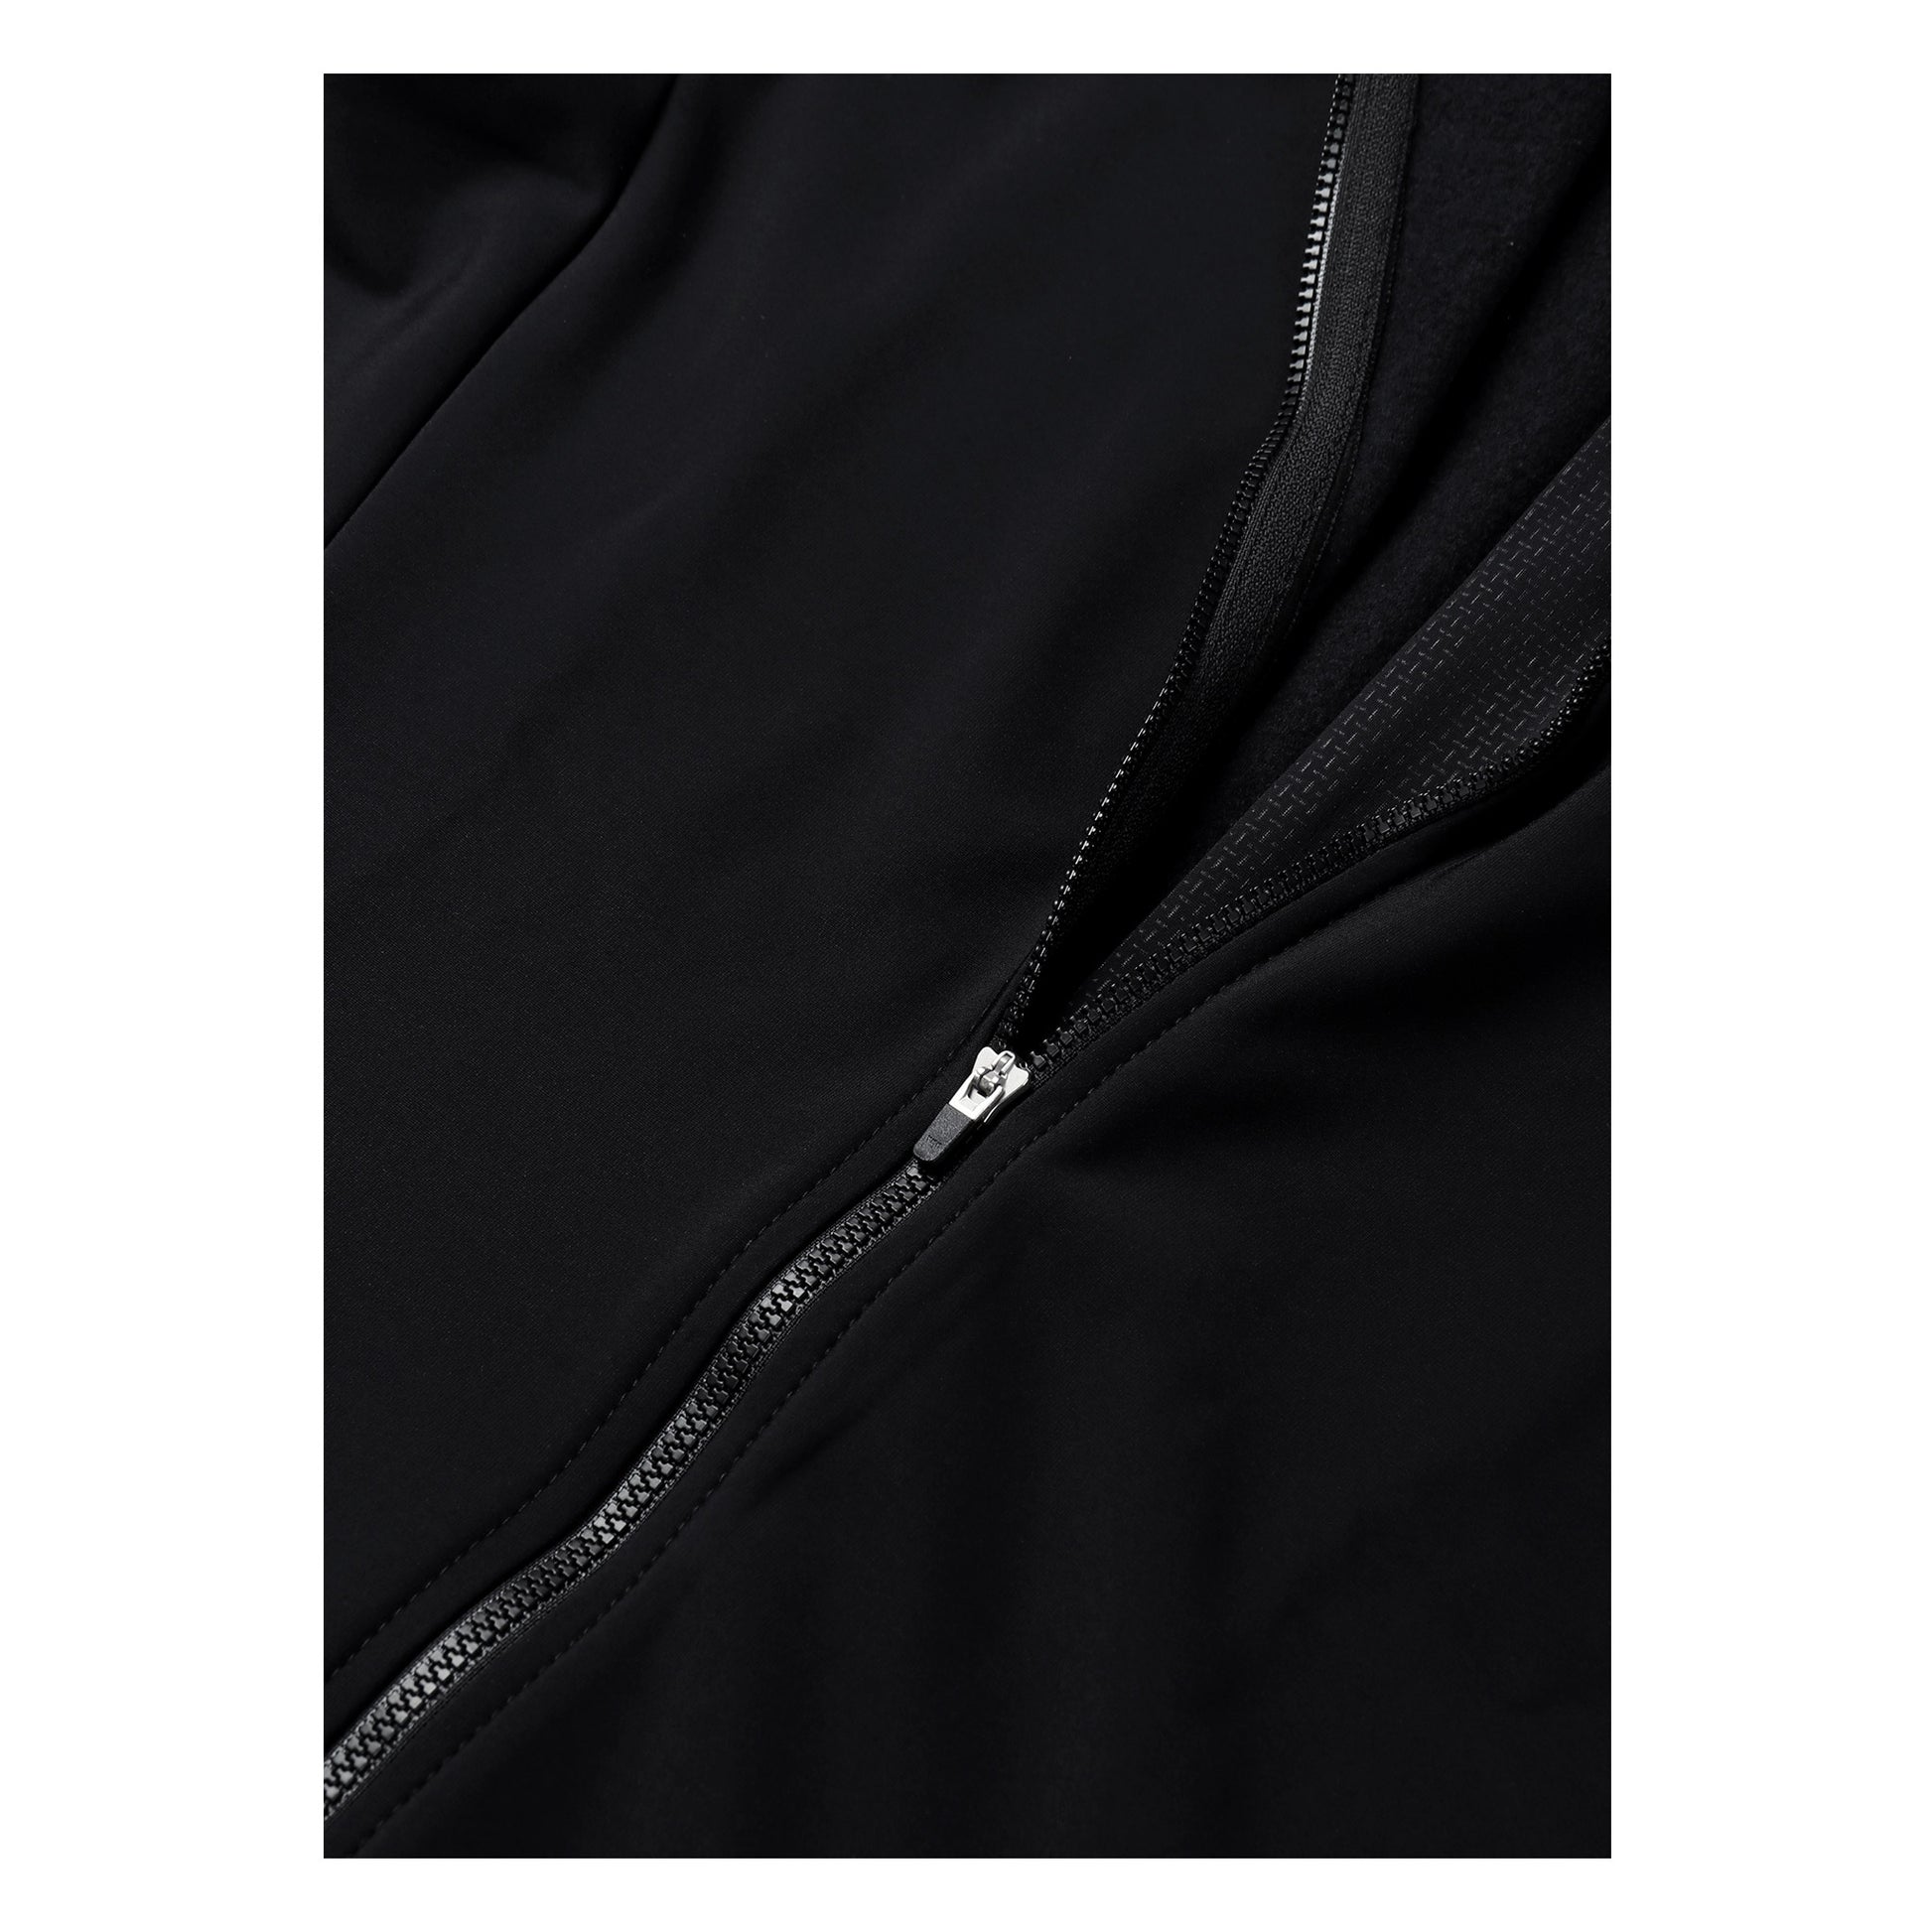 Milano Thermal Long Sleeve Jersey Black from Ascender Cycling Club Zürich Switzerland Full Length Autolock Zipper View